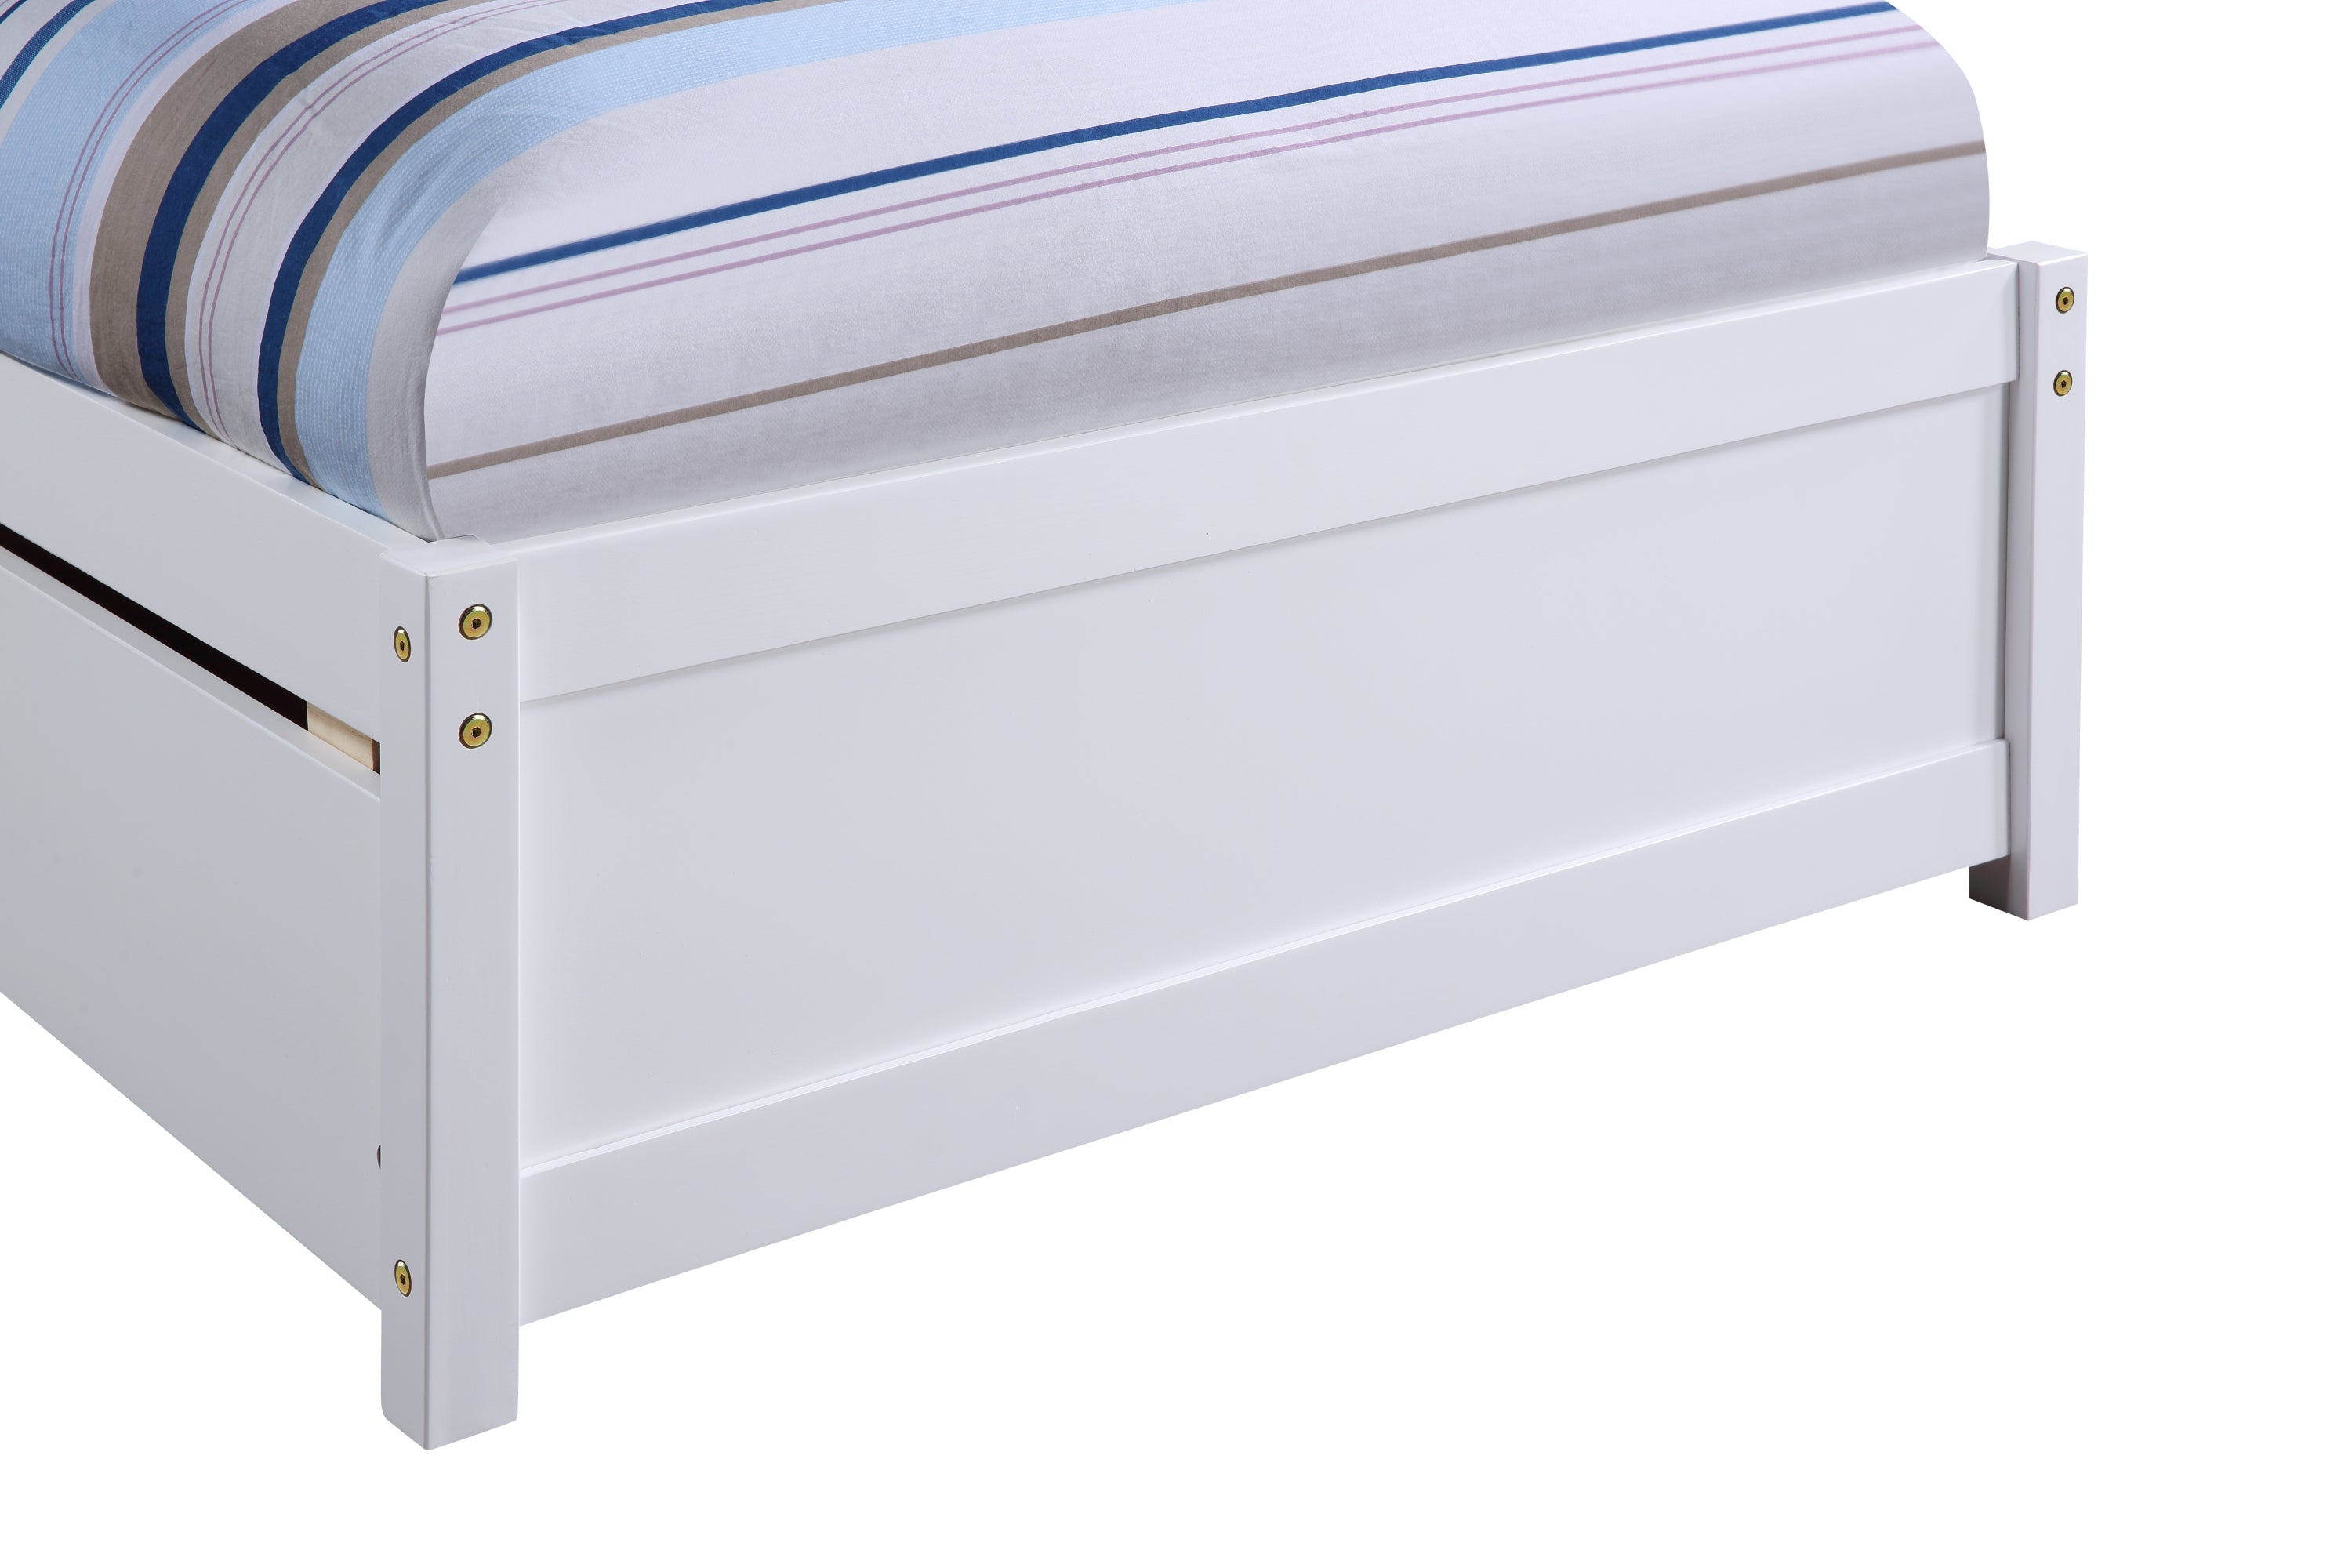 White Twin Bed with 2 Drawers - Solid Wood Frame, No Box Spring Needed - Storage Solution